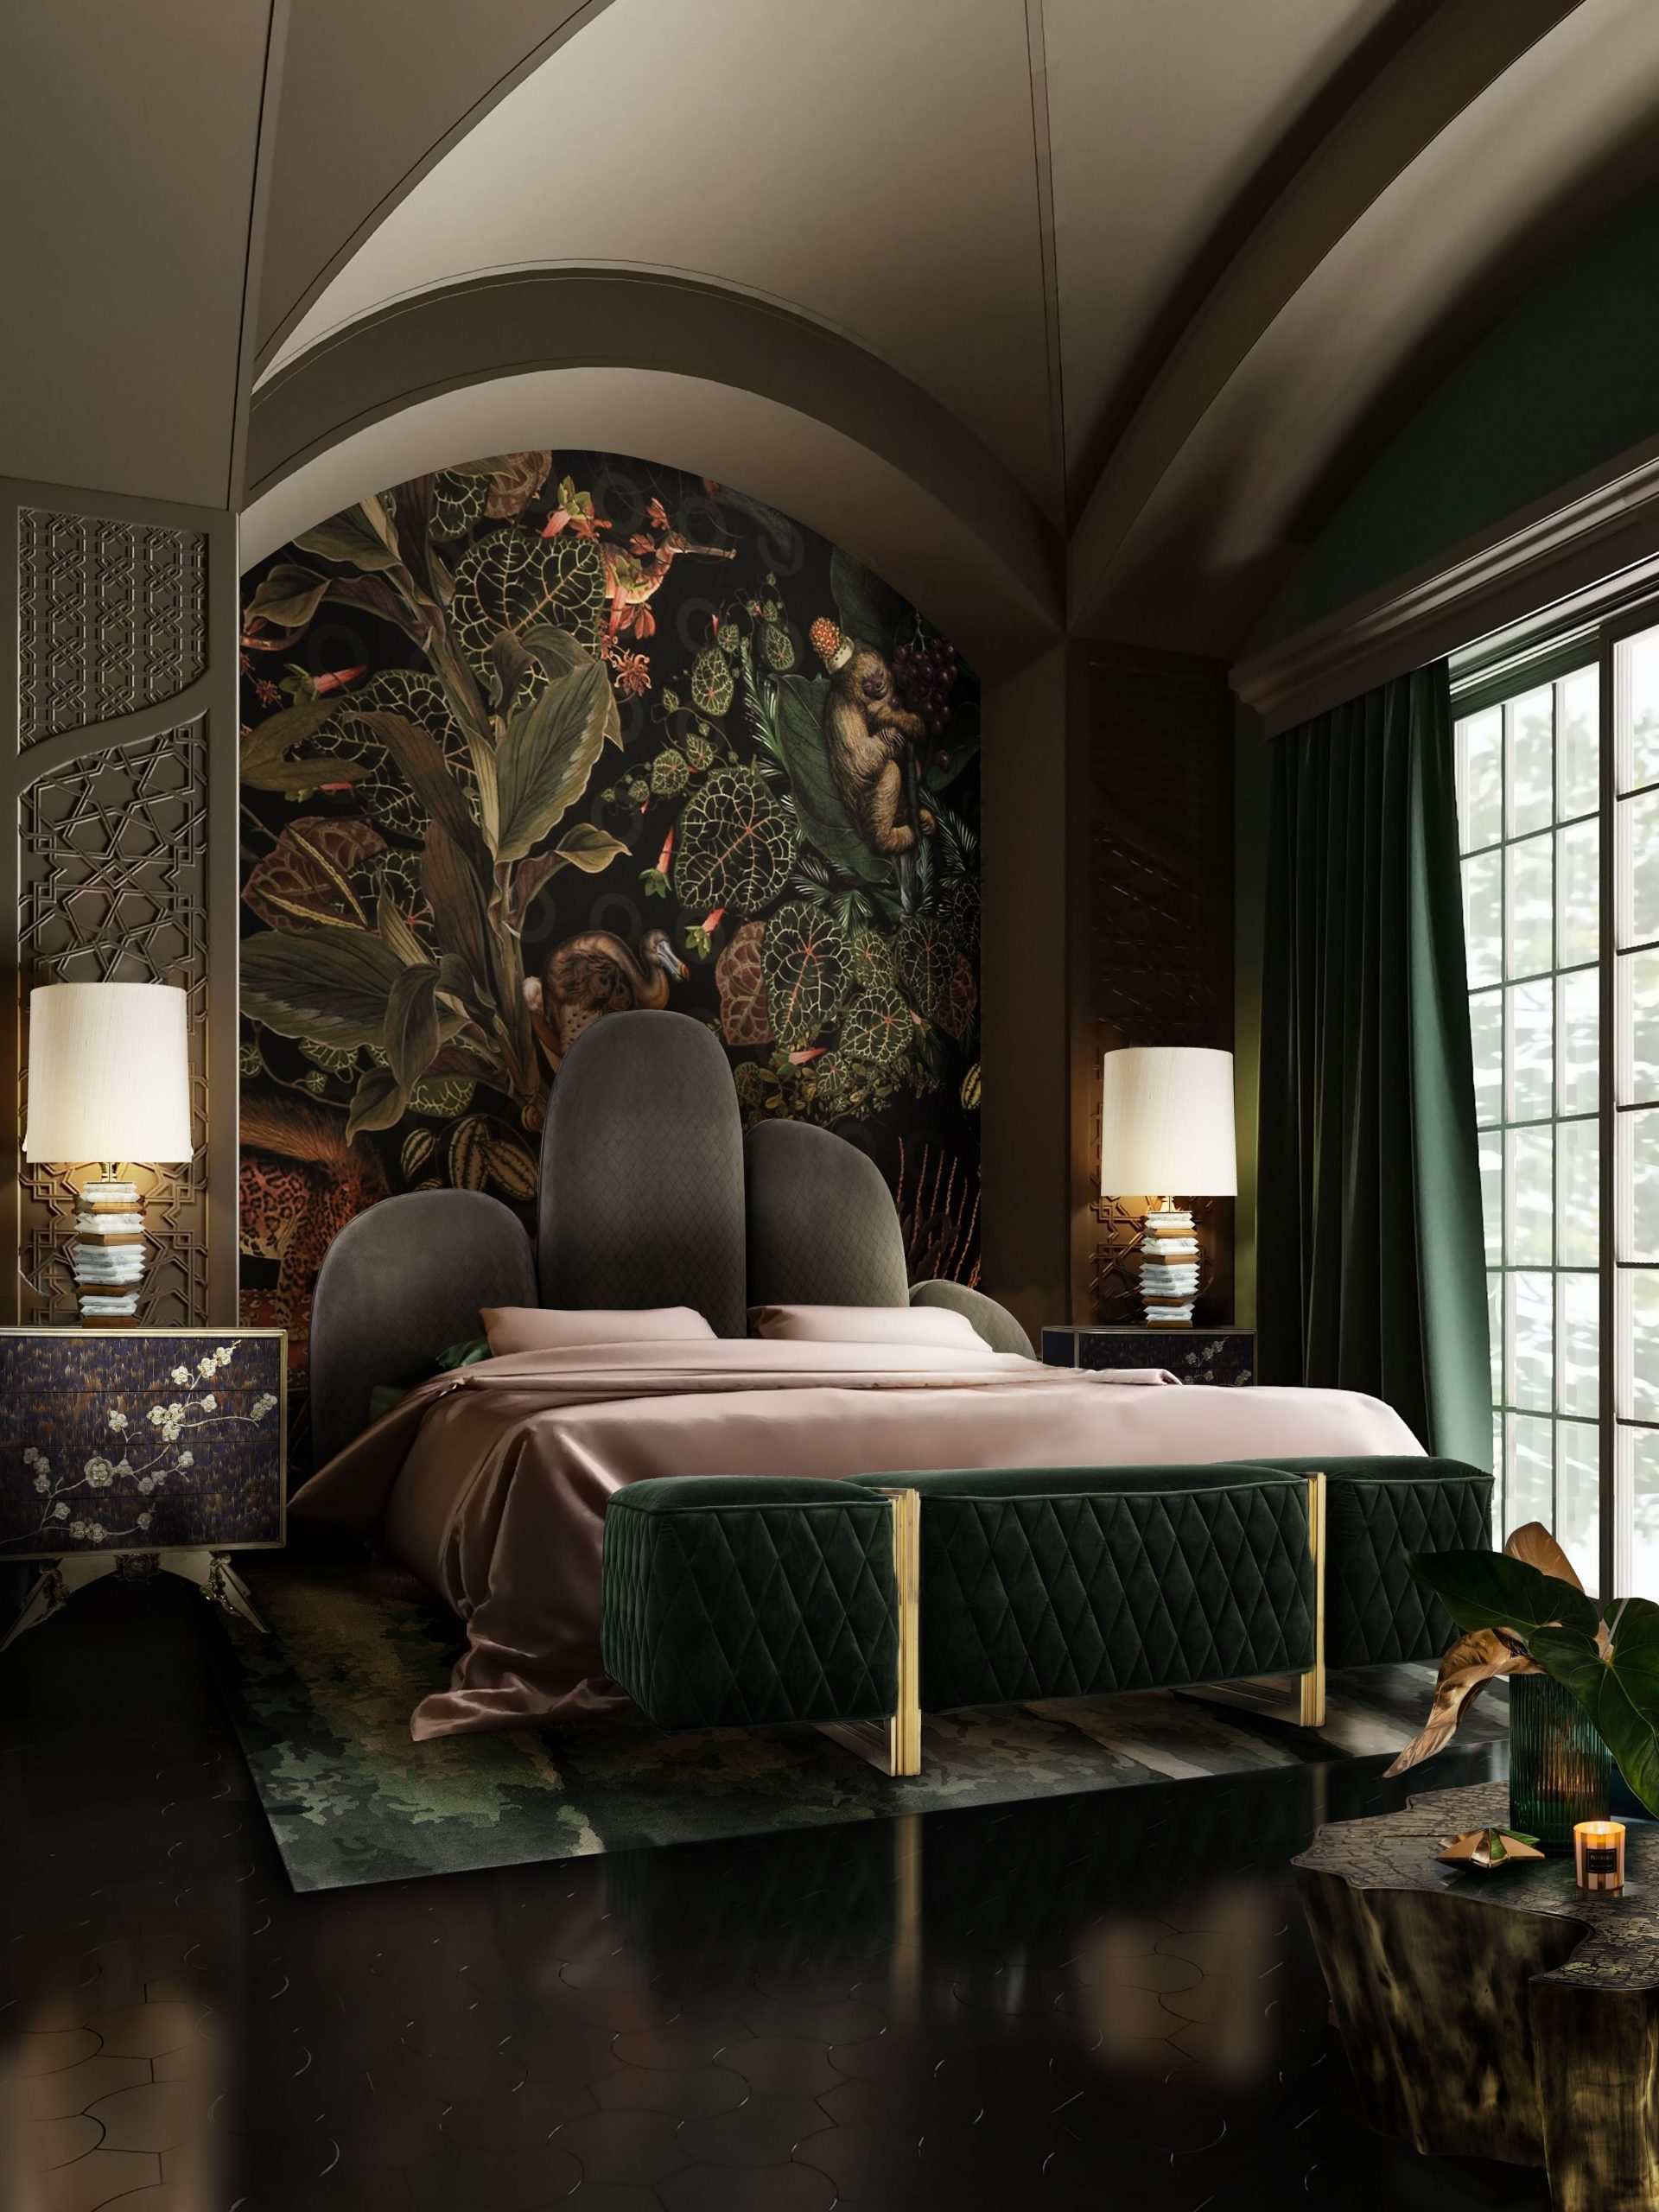 4 maximalist interior design ideas for a luxurious home